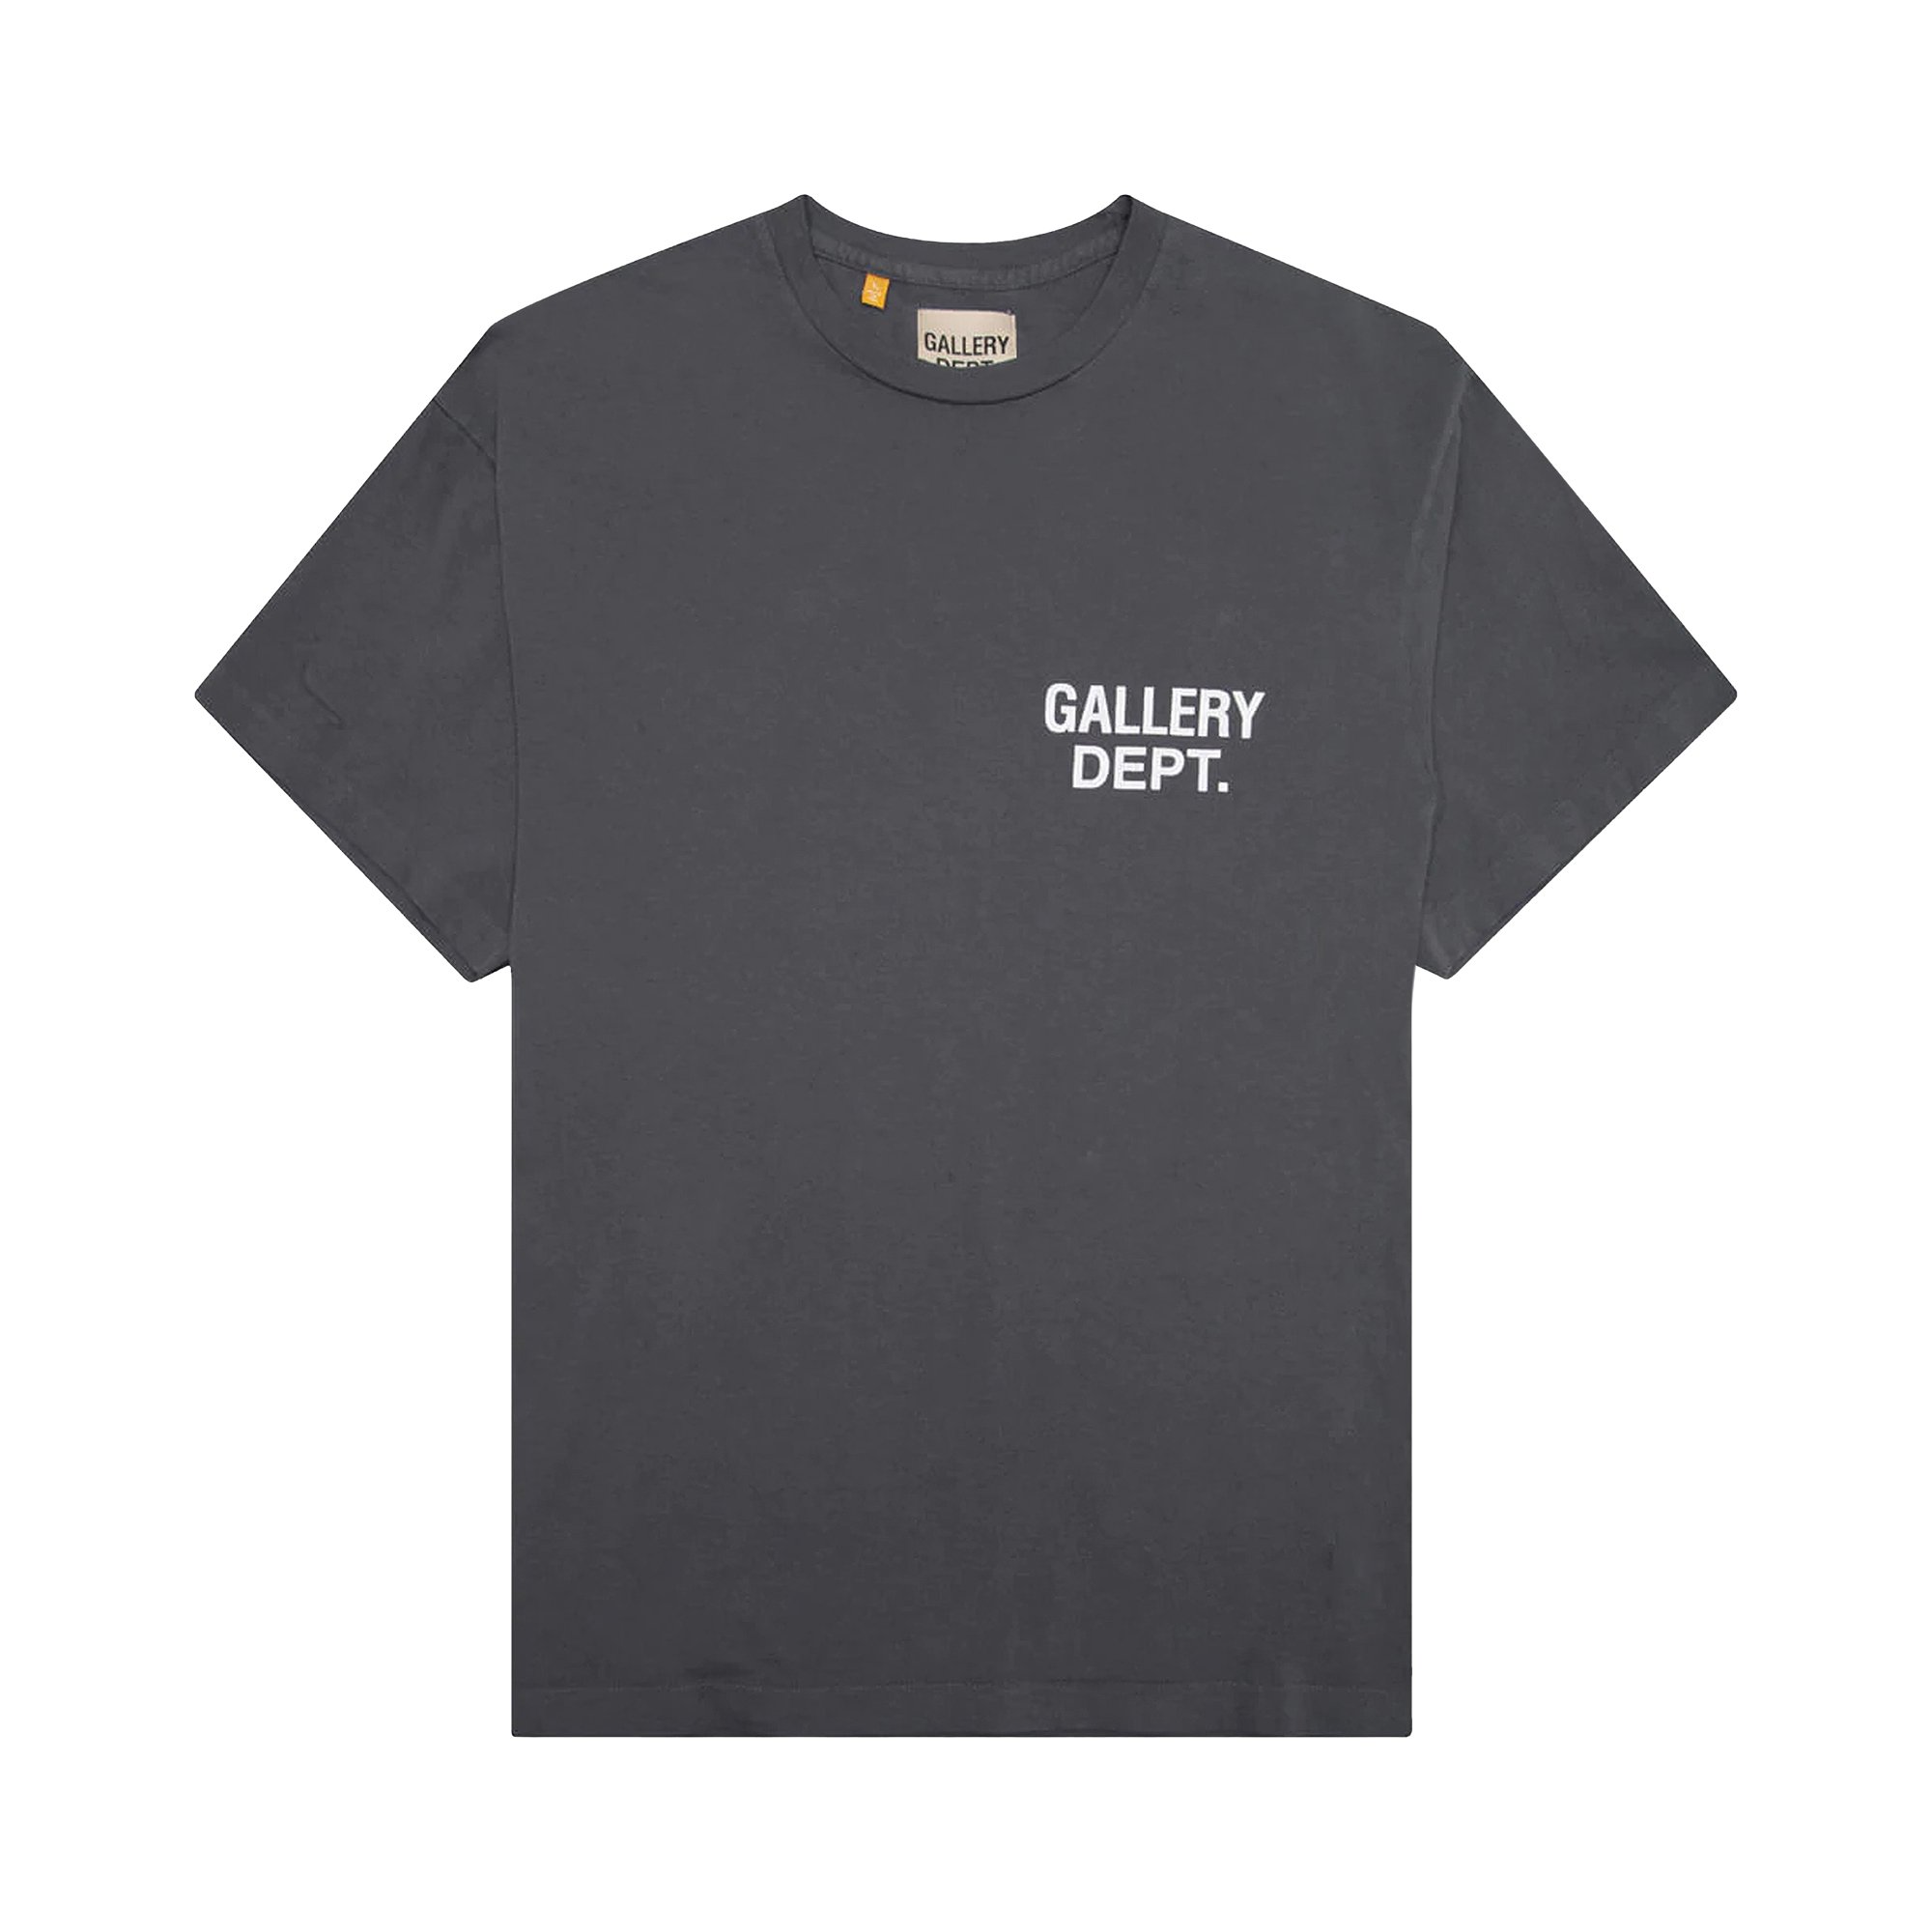 GALLERY DEPT. Washed French Vintage Tシャツ新品未使用 - Tシャツ ...